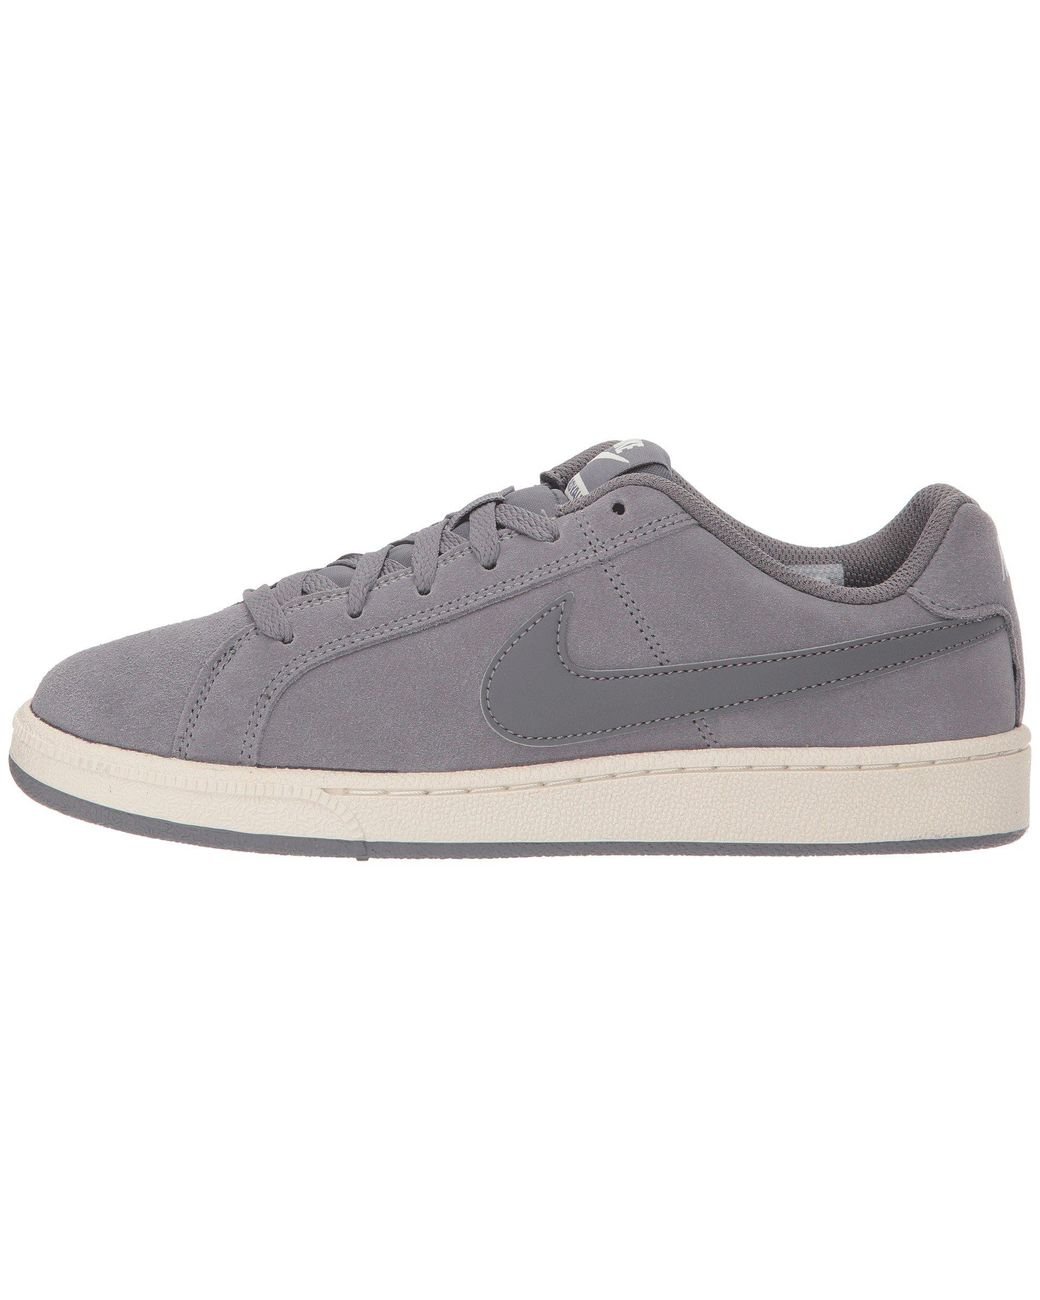 Nike Suede (black/black/thunder Grey) Women's Shoes Gray | Lyst